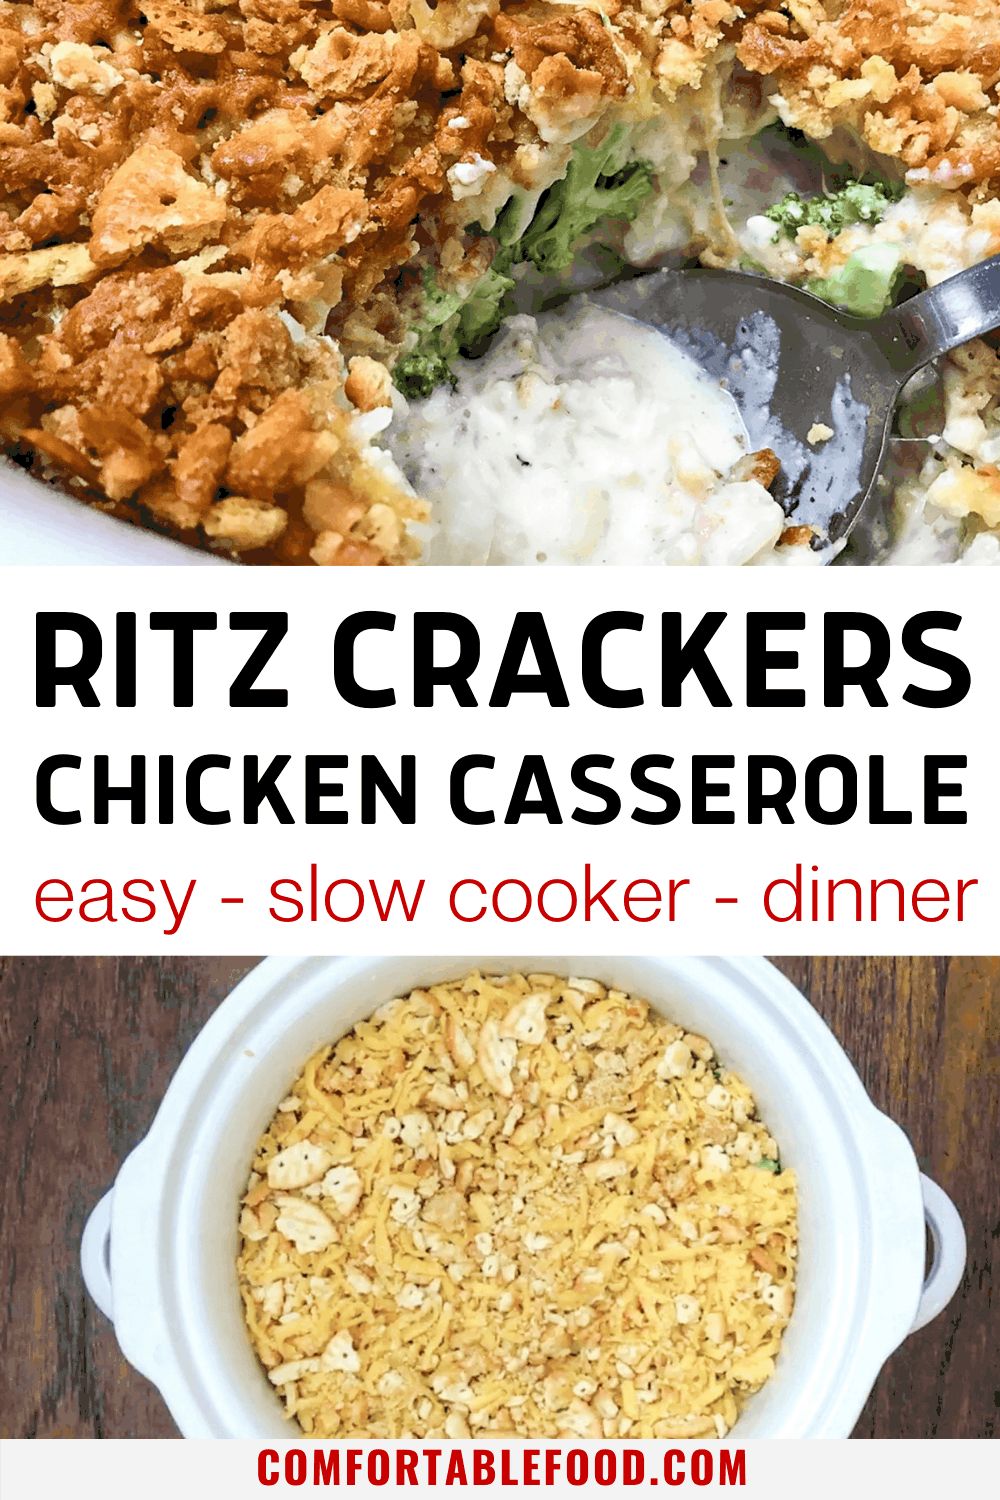 One spoon of chicken casserole with ritz crackers and broccoli and a slow cooker